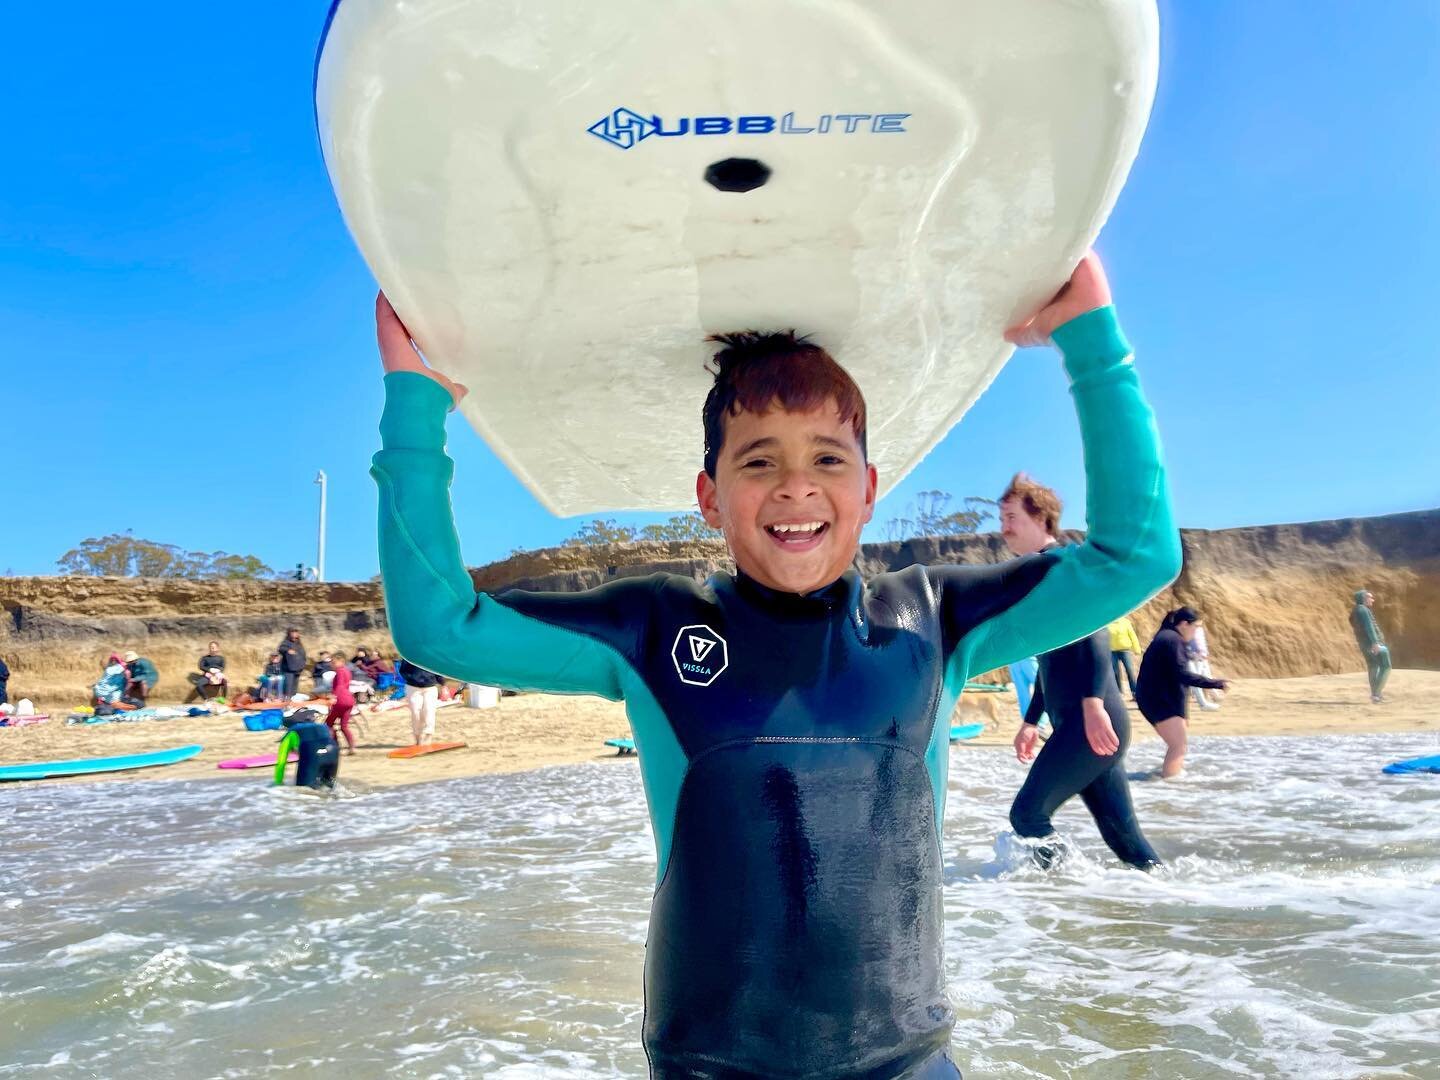 We had a wild and fun day yesterday with @friendssfbay staff, youth and their mentors. Sun was shining and another late season bombing swell provided the kids with lots of waves and smiles for days. @friendssfbay is a great program from top to bottom